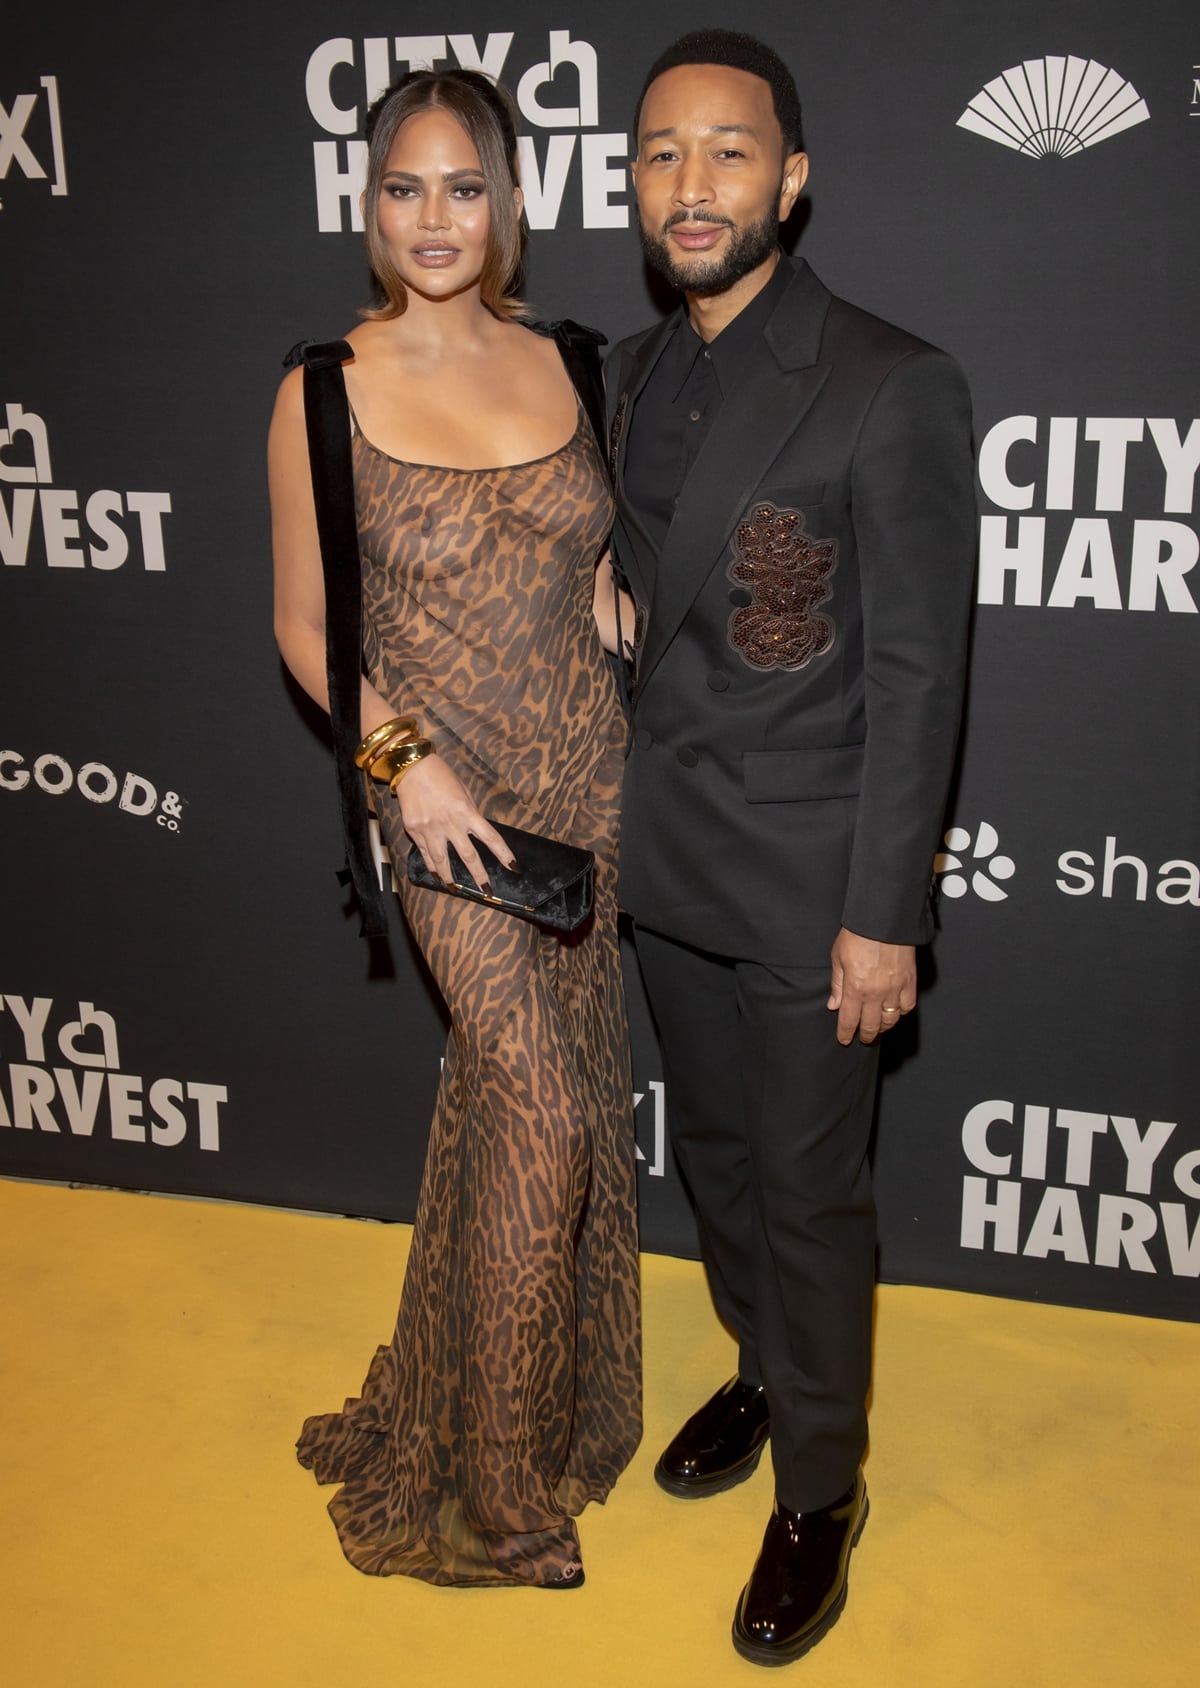 John Legend and Chrissy Teigen dazzle as they support City Harvest in NYC, helping raise enough to provide 10 million meals